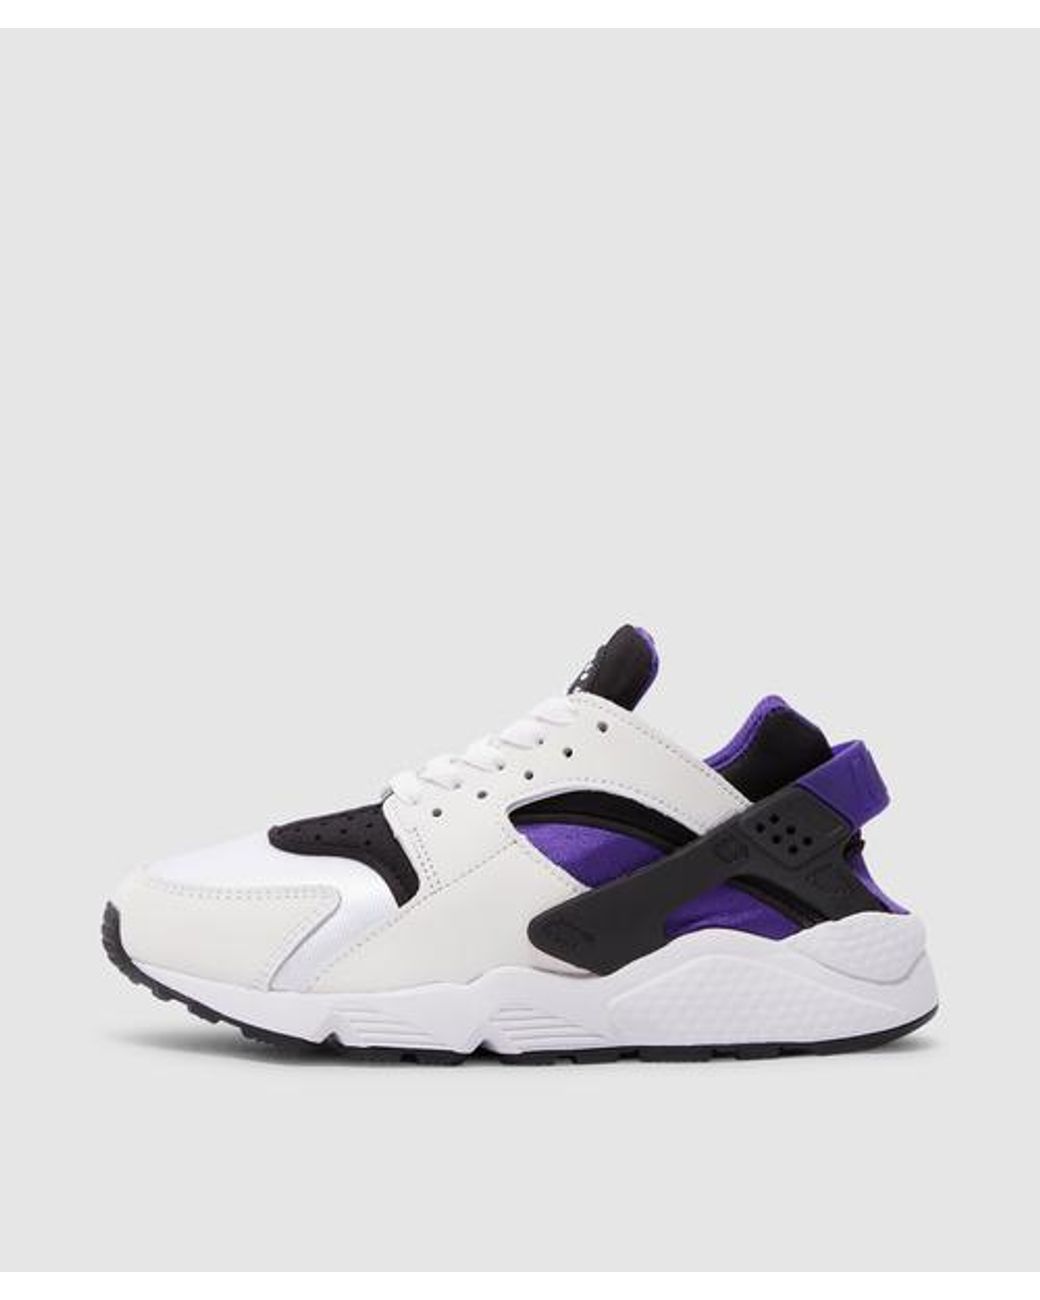 NIKE Womens Air Huarache Running Trainers DX8952 Sneakers Shoes